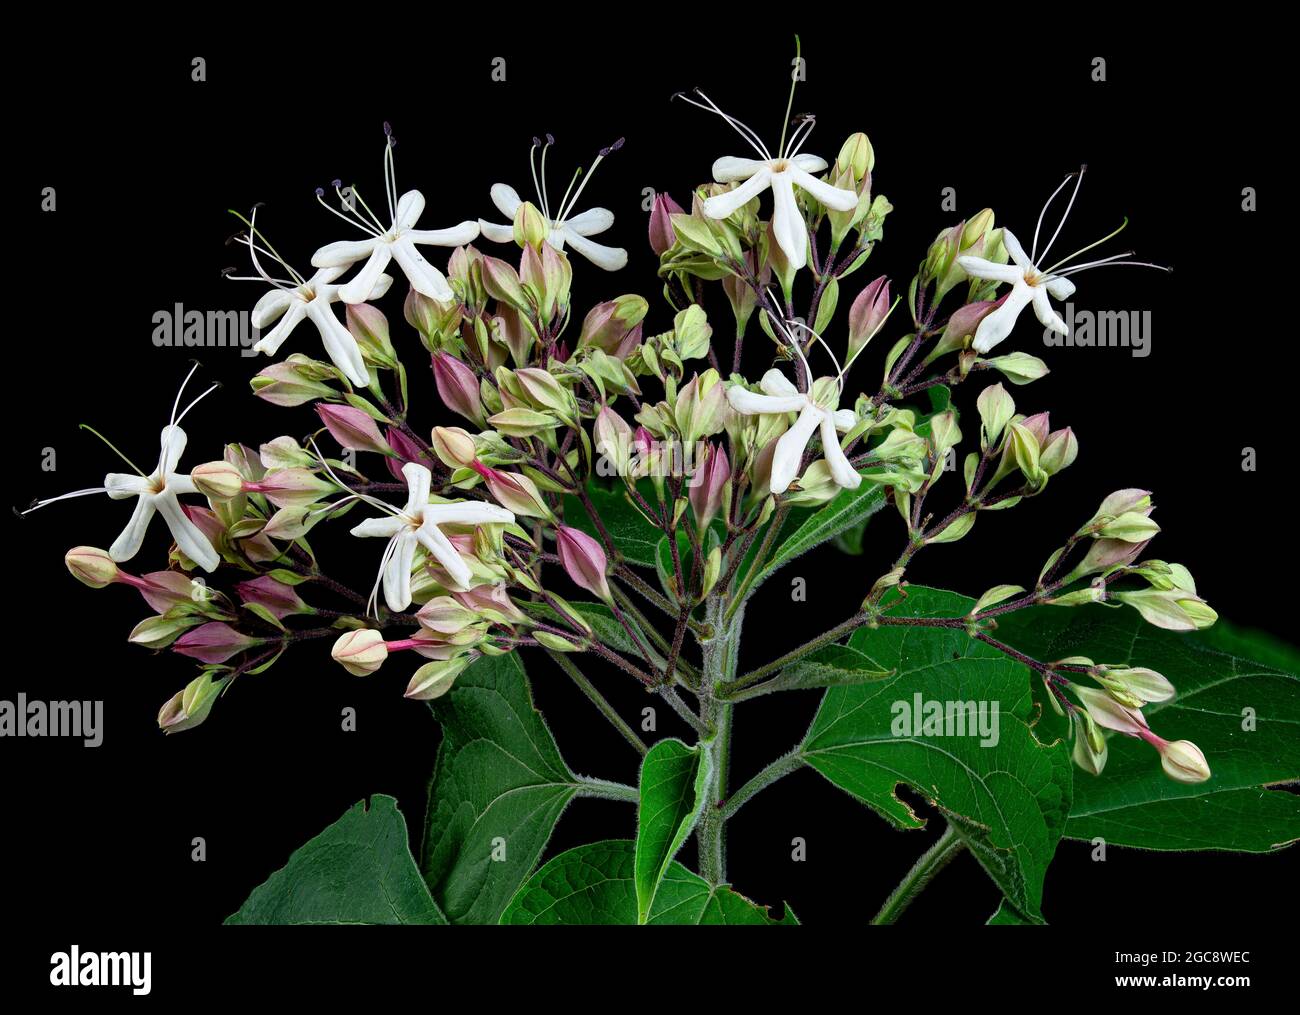 Flowers, buds, and leavaes of Harlequin glory-bower (Clerodendrum trichocomum), a shrub native to Eastern Asia and grown eslewhere as an ornamental sh Stock Photo